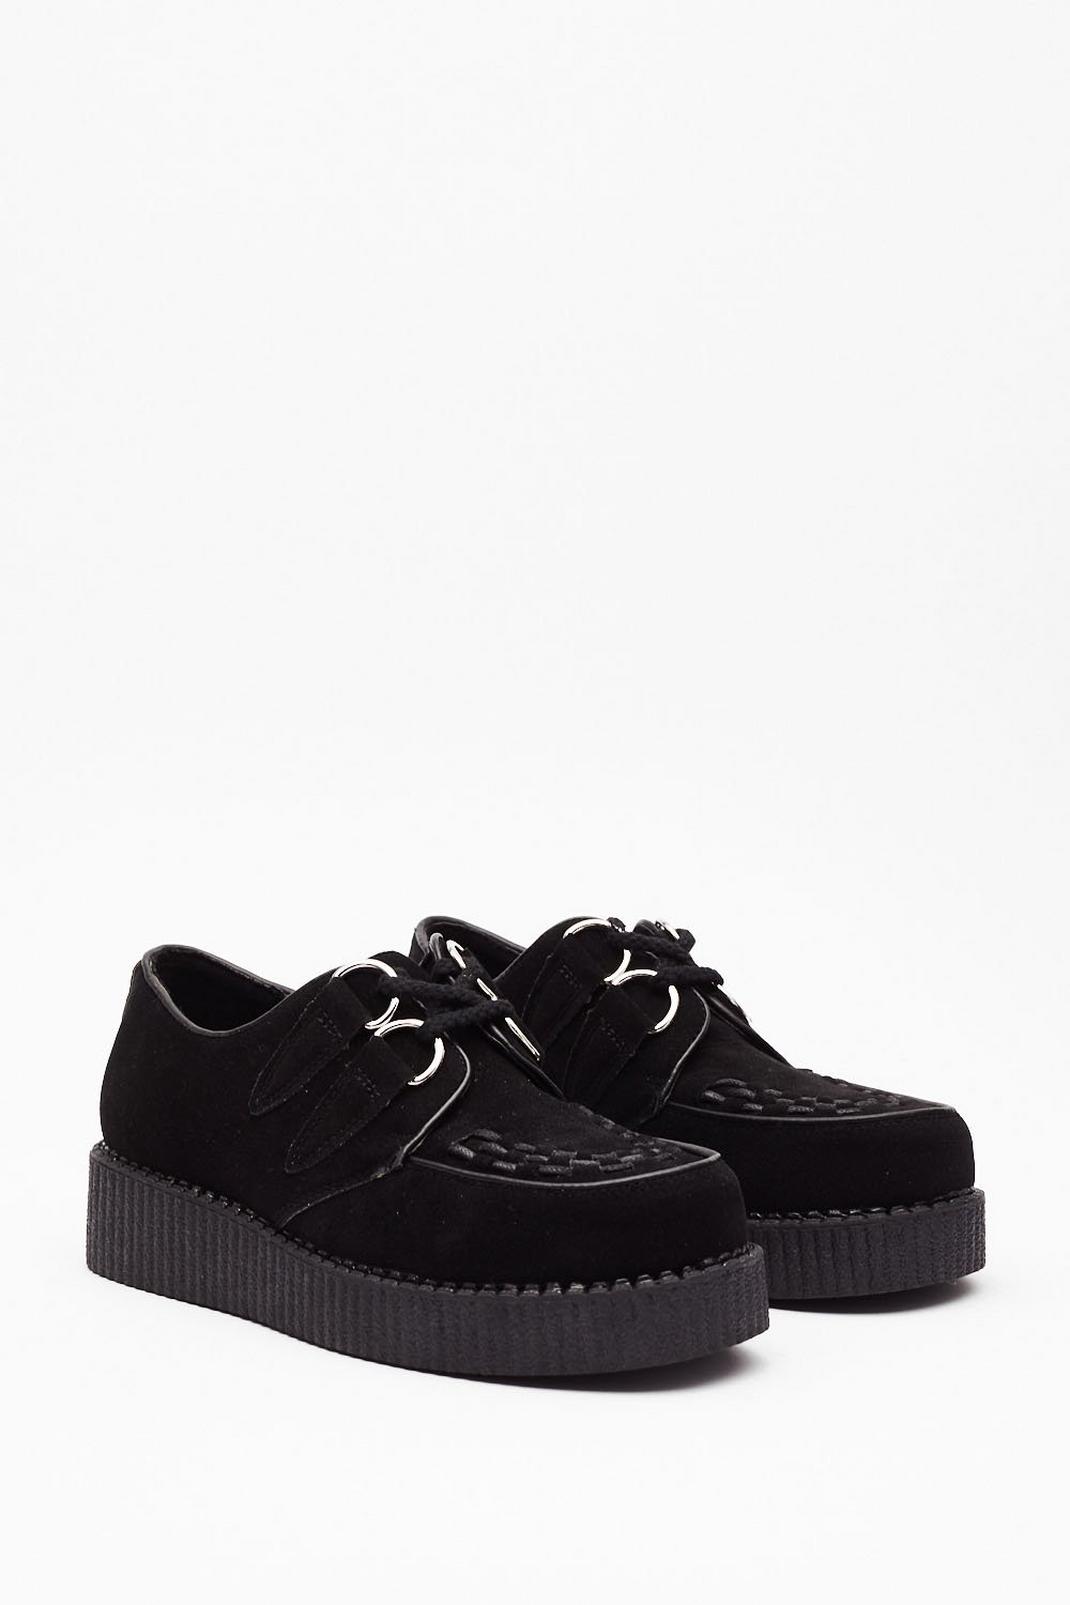 Creepin' Up On Me Faux Suede Chunky Shoes | Nasty Gal